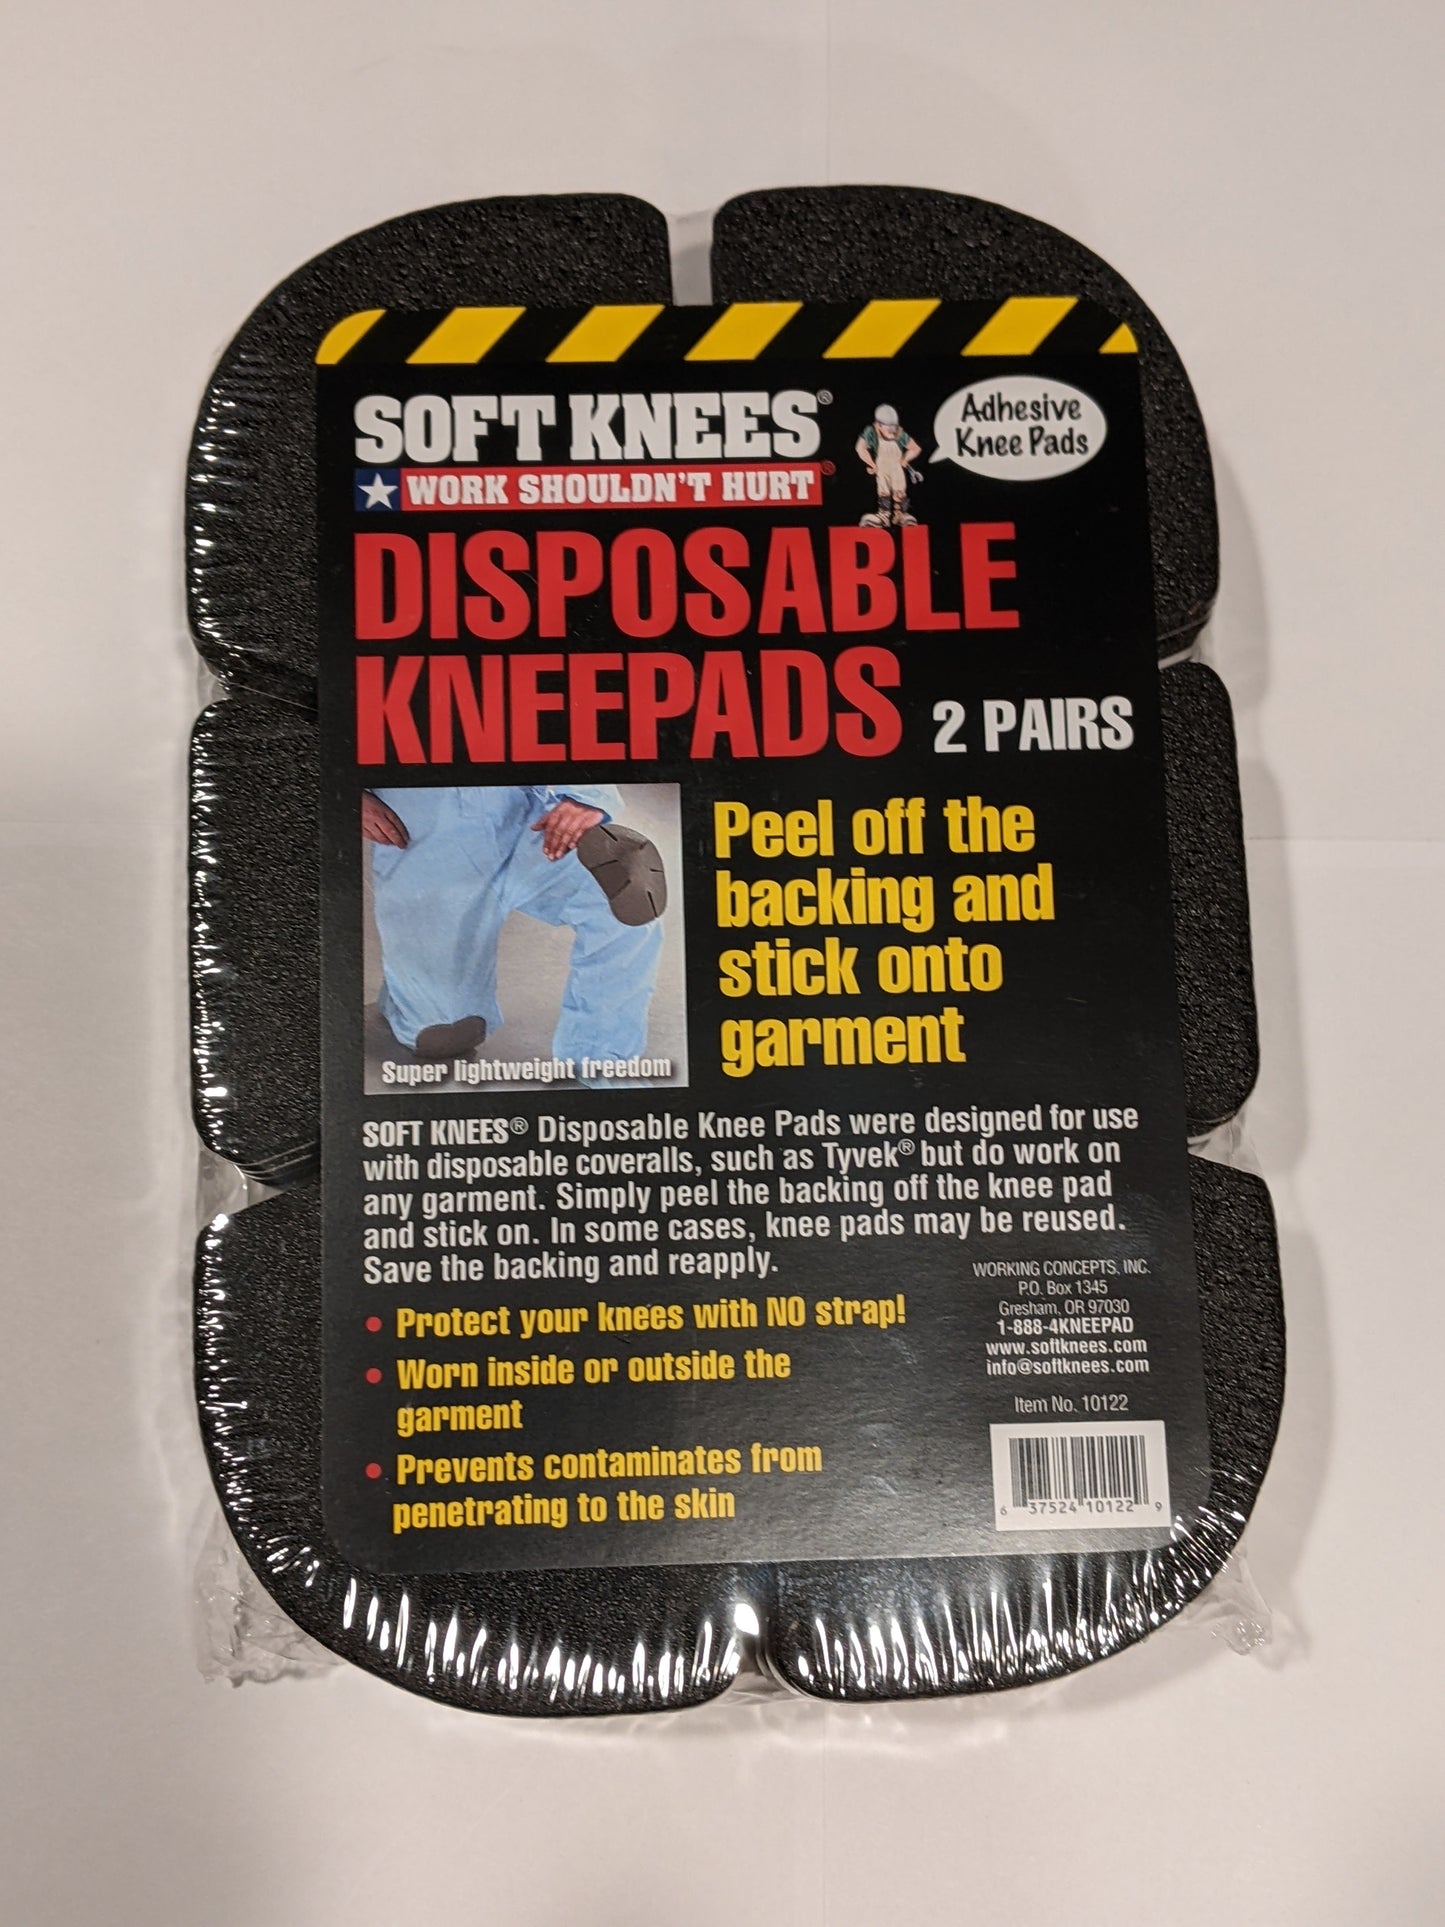 10122 Soft Knees 6" x 9" Disposable Knee Pads 2 Pair Pack